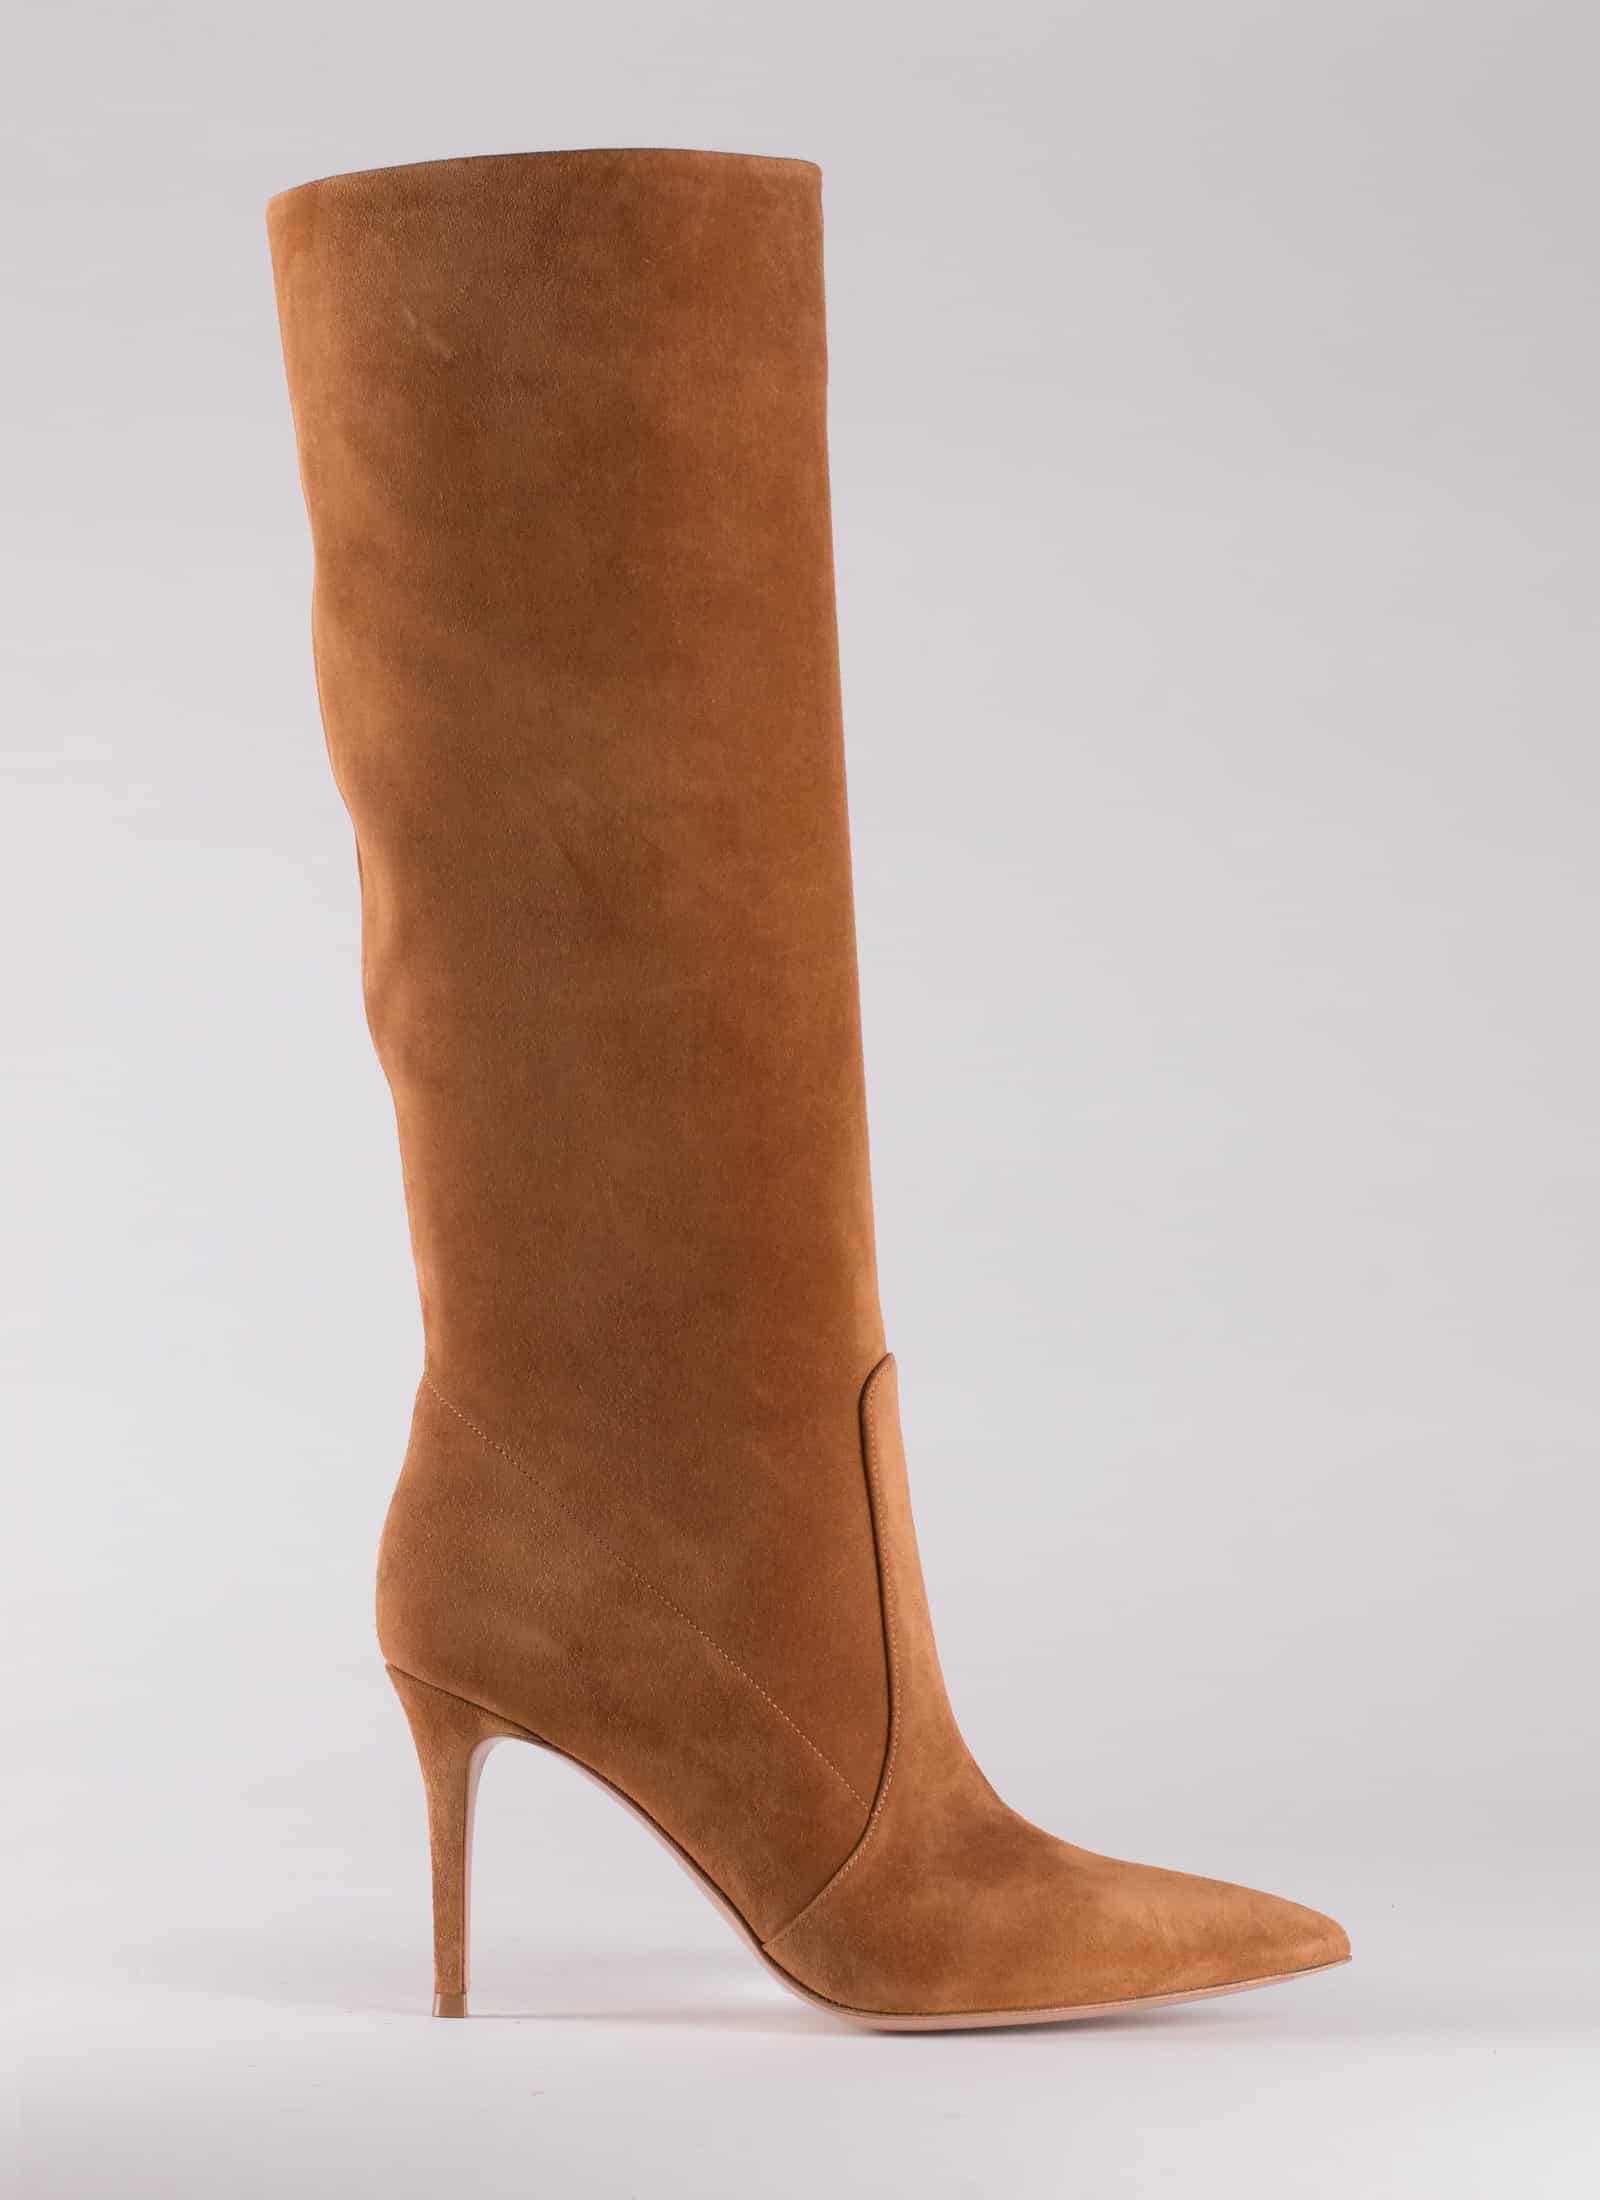 SUEDE BOOTS - GIANVITO ROSSI